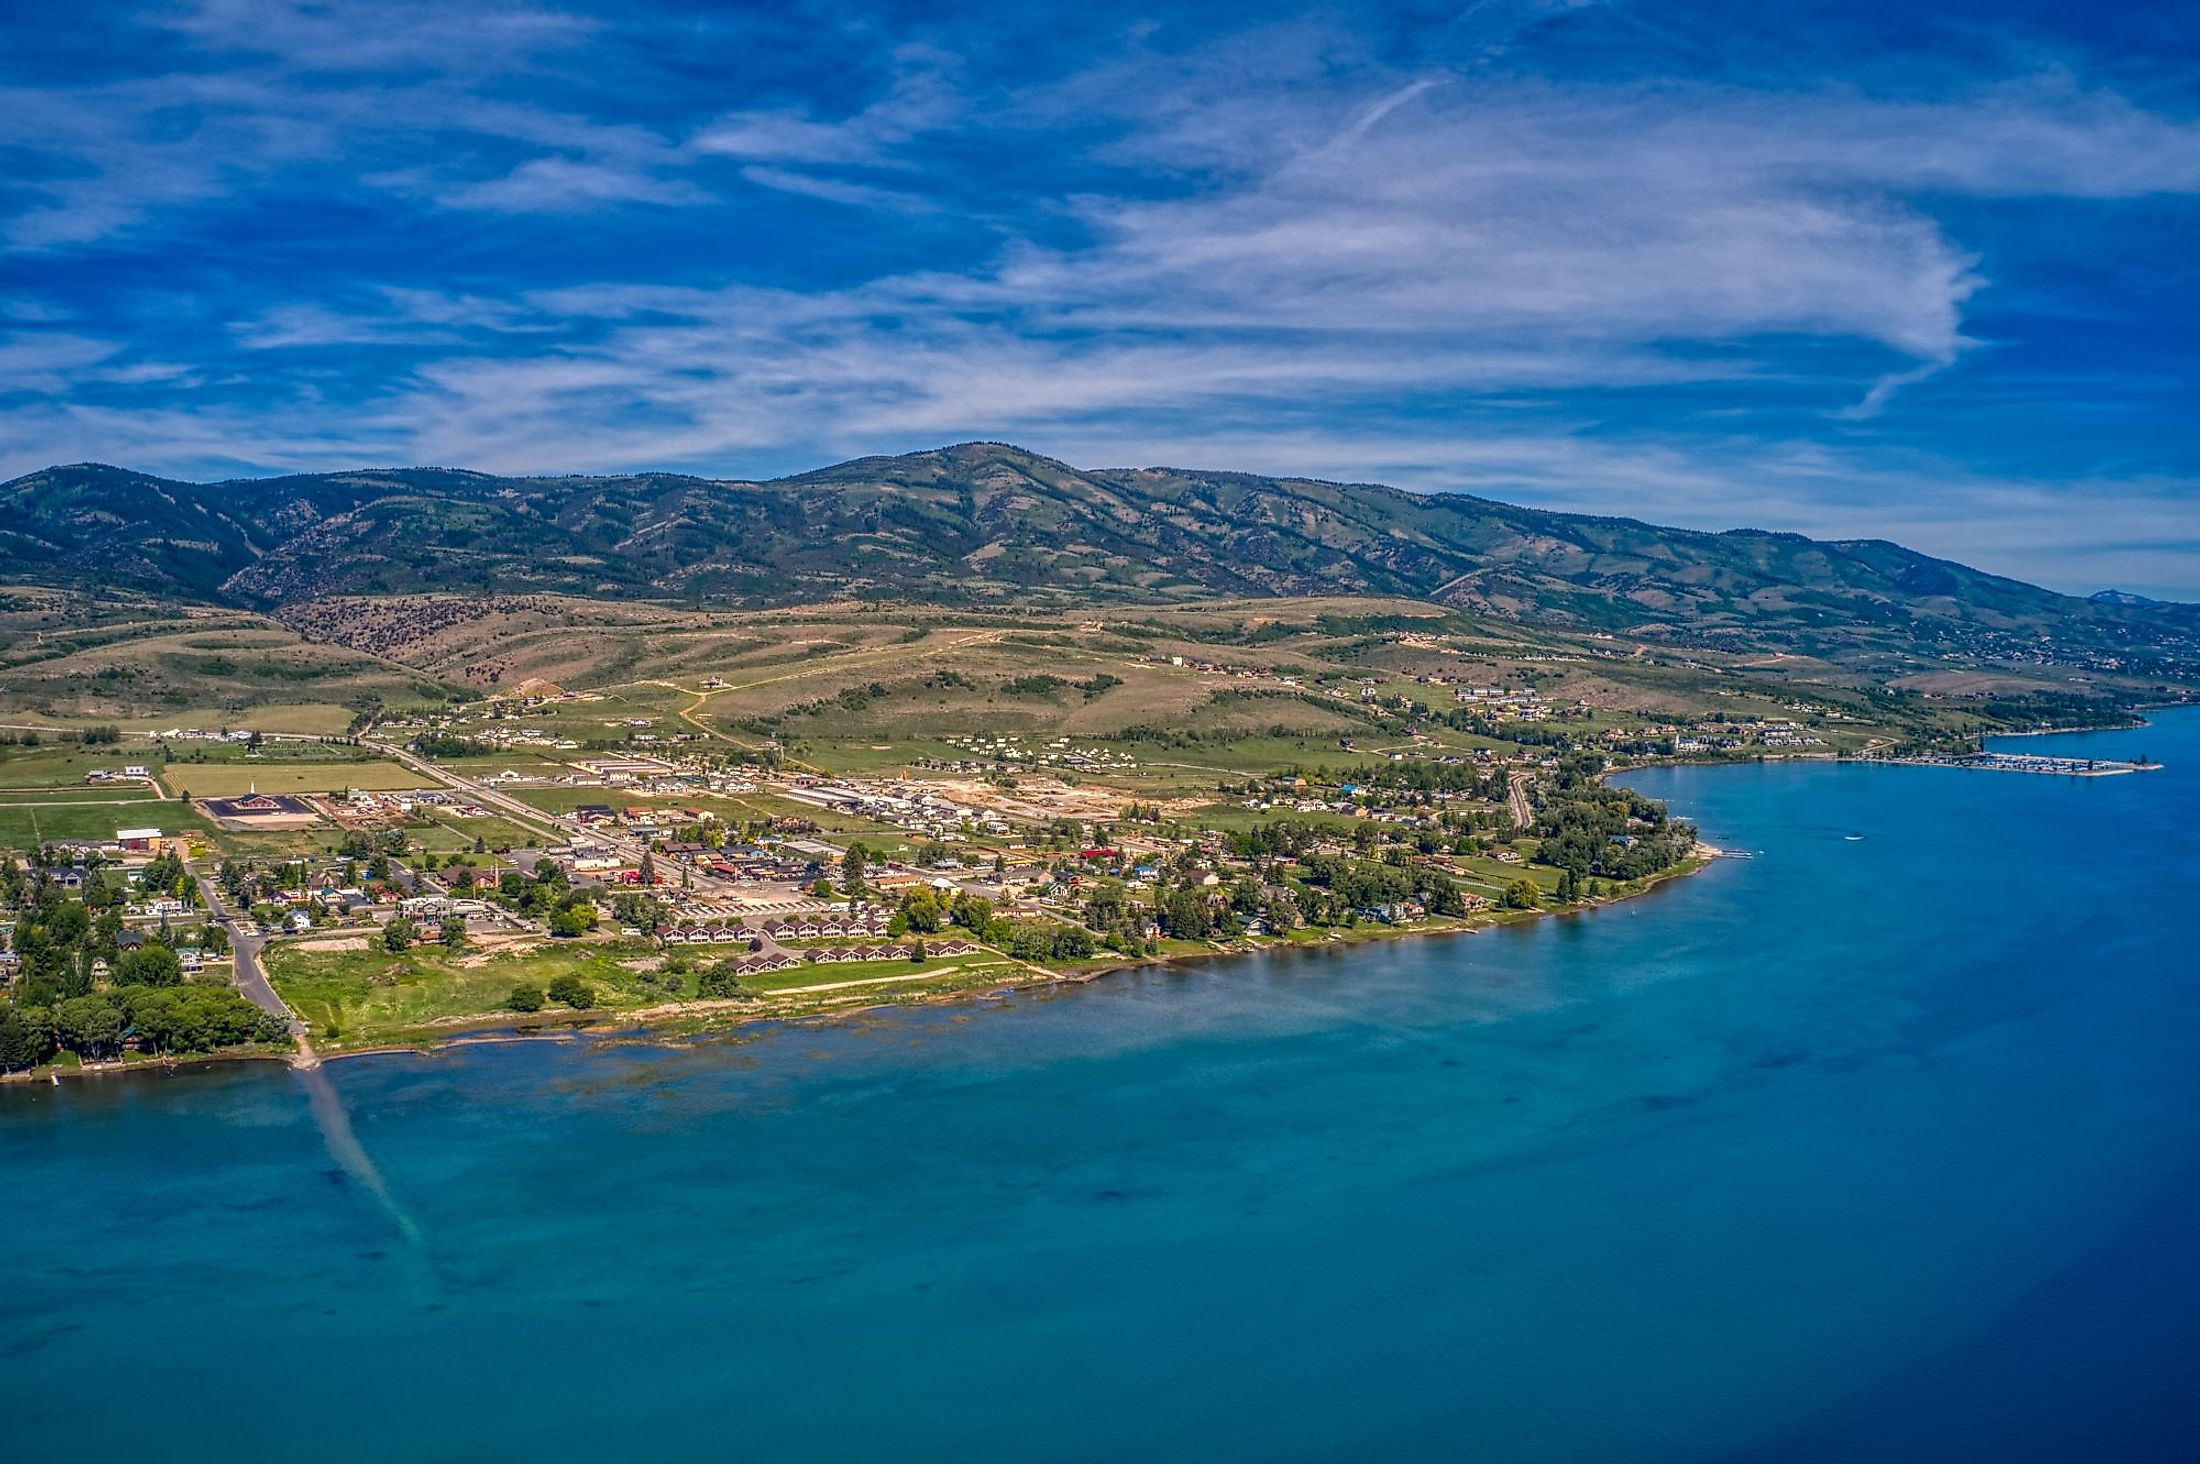 Aerial view of Garden City, Utah on the shores of Bear Lake.